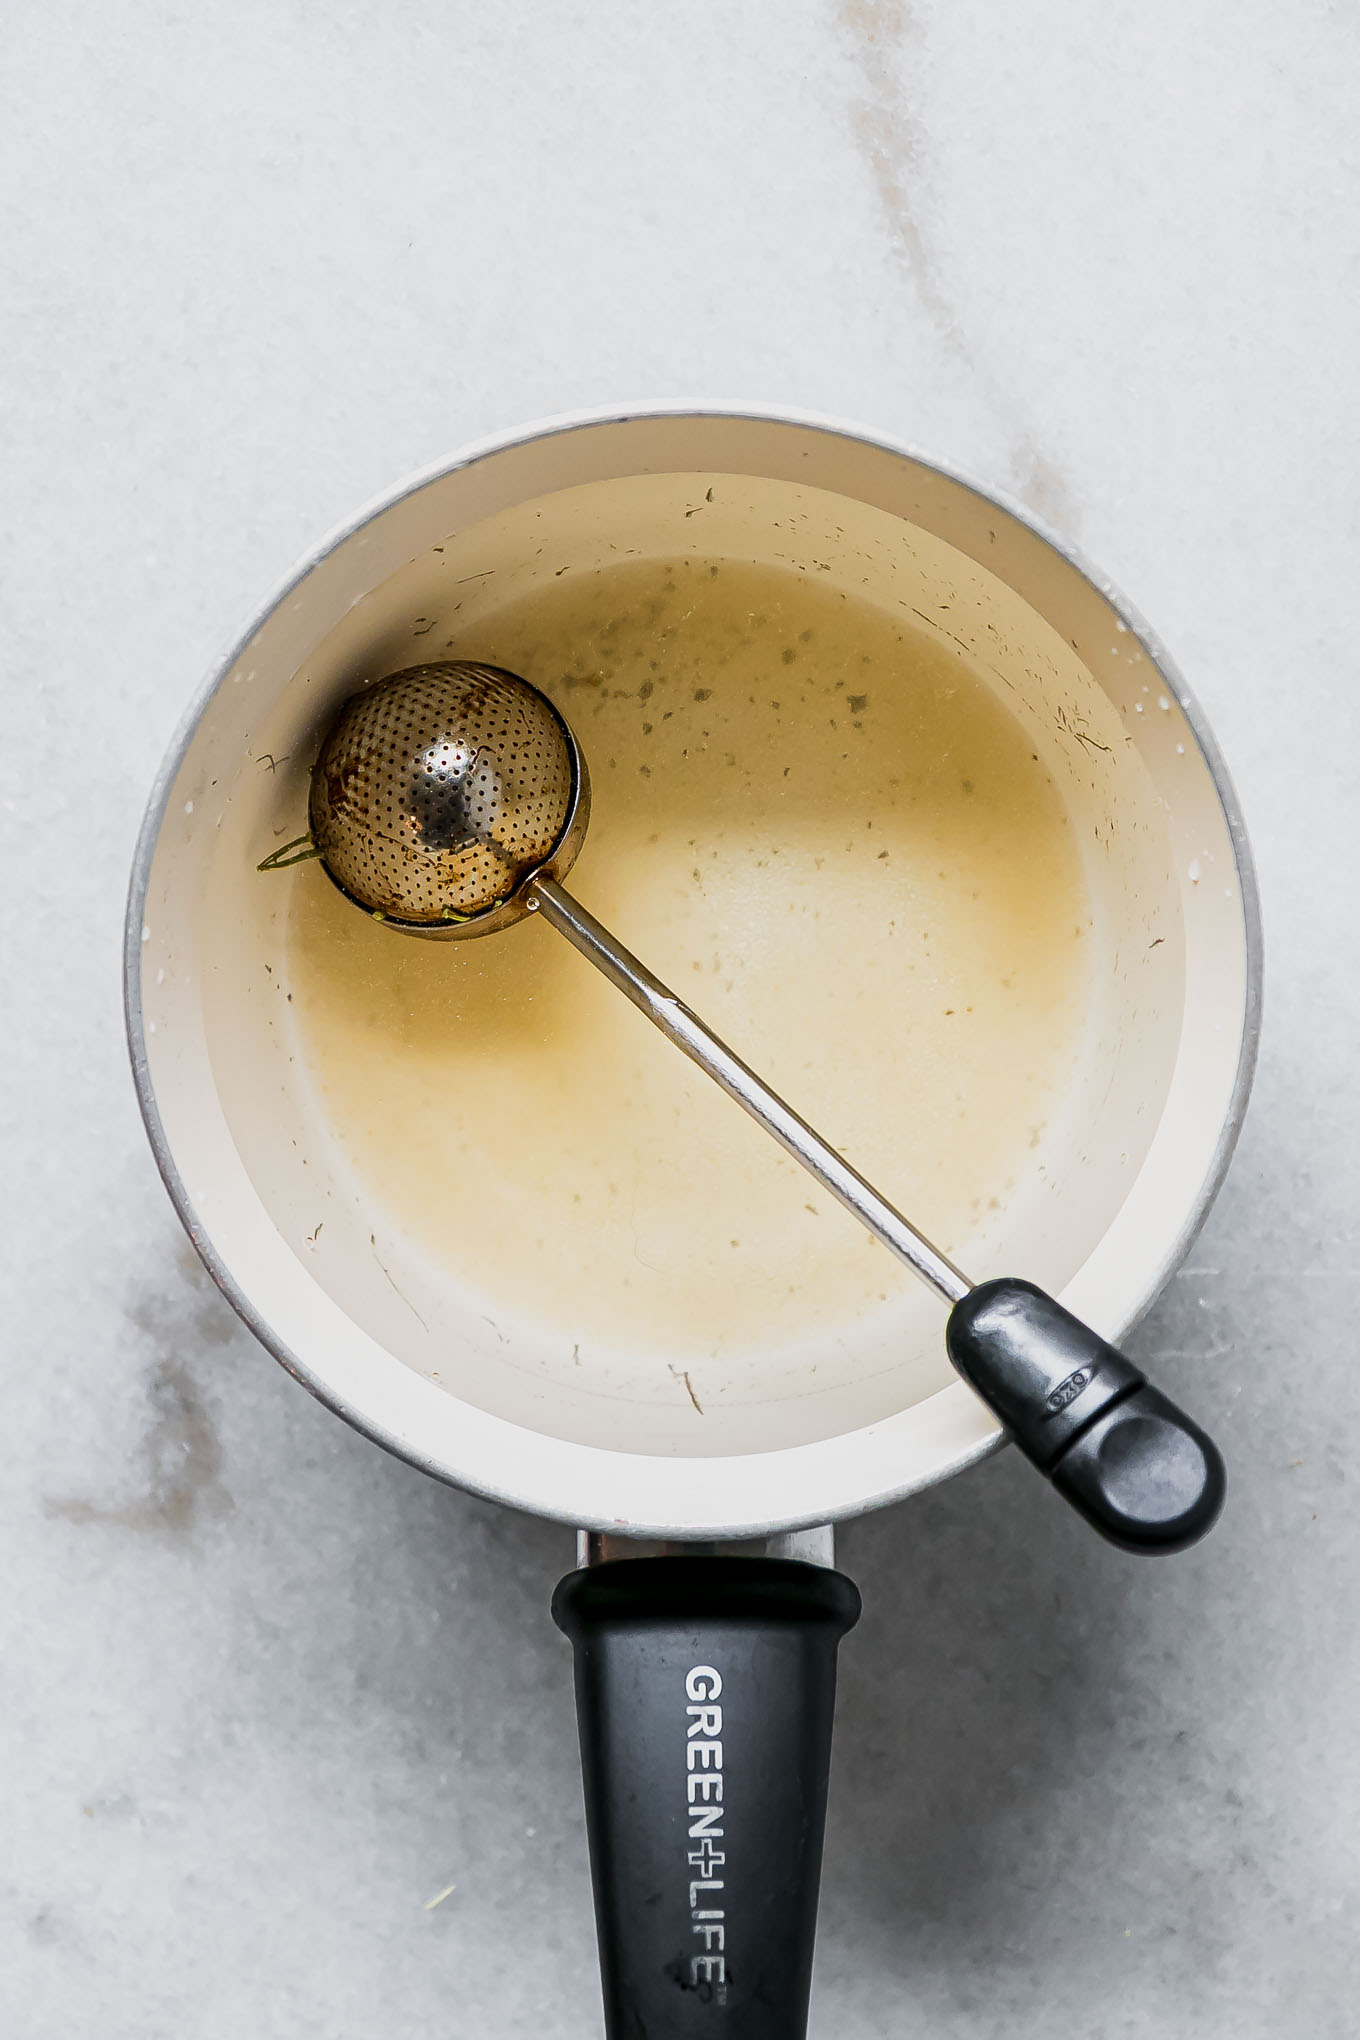 jasmine flower buds in a tea infuser in a white saucepan with water and sugar